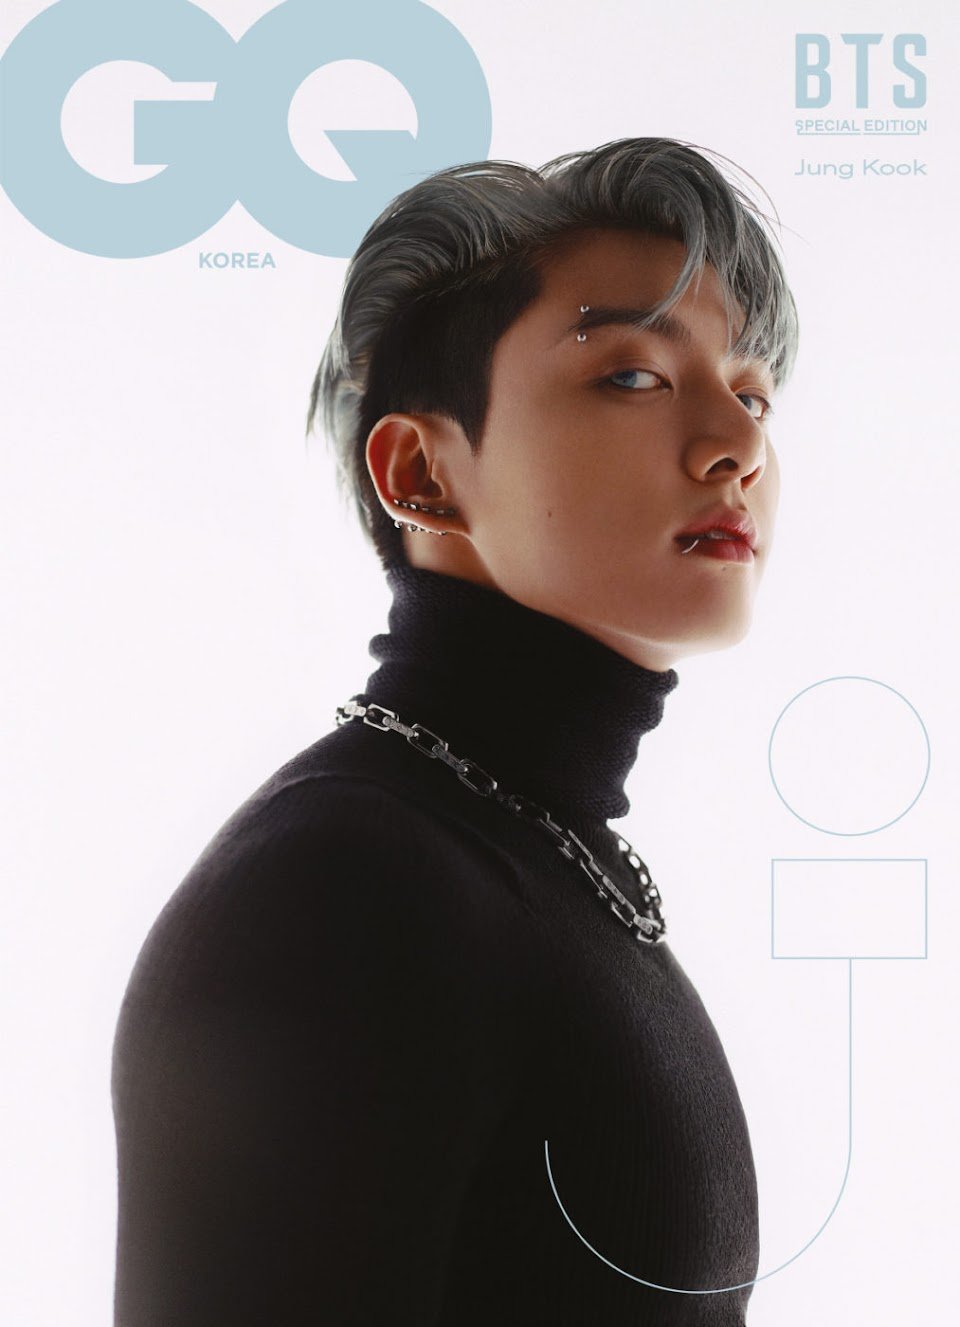 BTS Jungkook and Jimin's GQ covers get sold out, fans call them